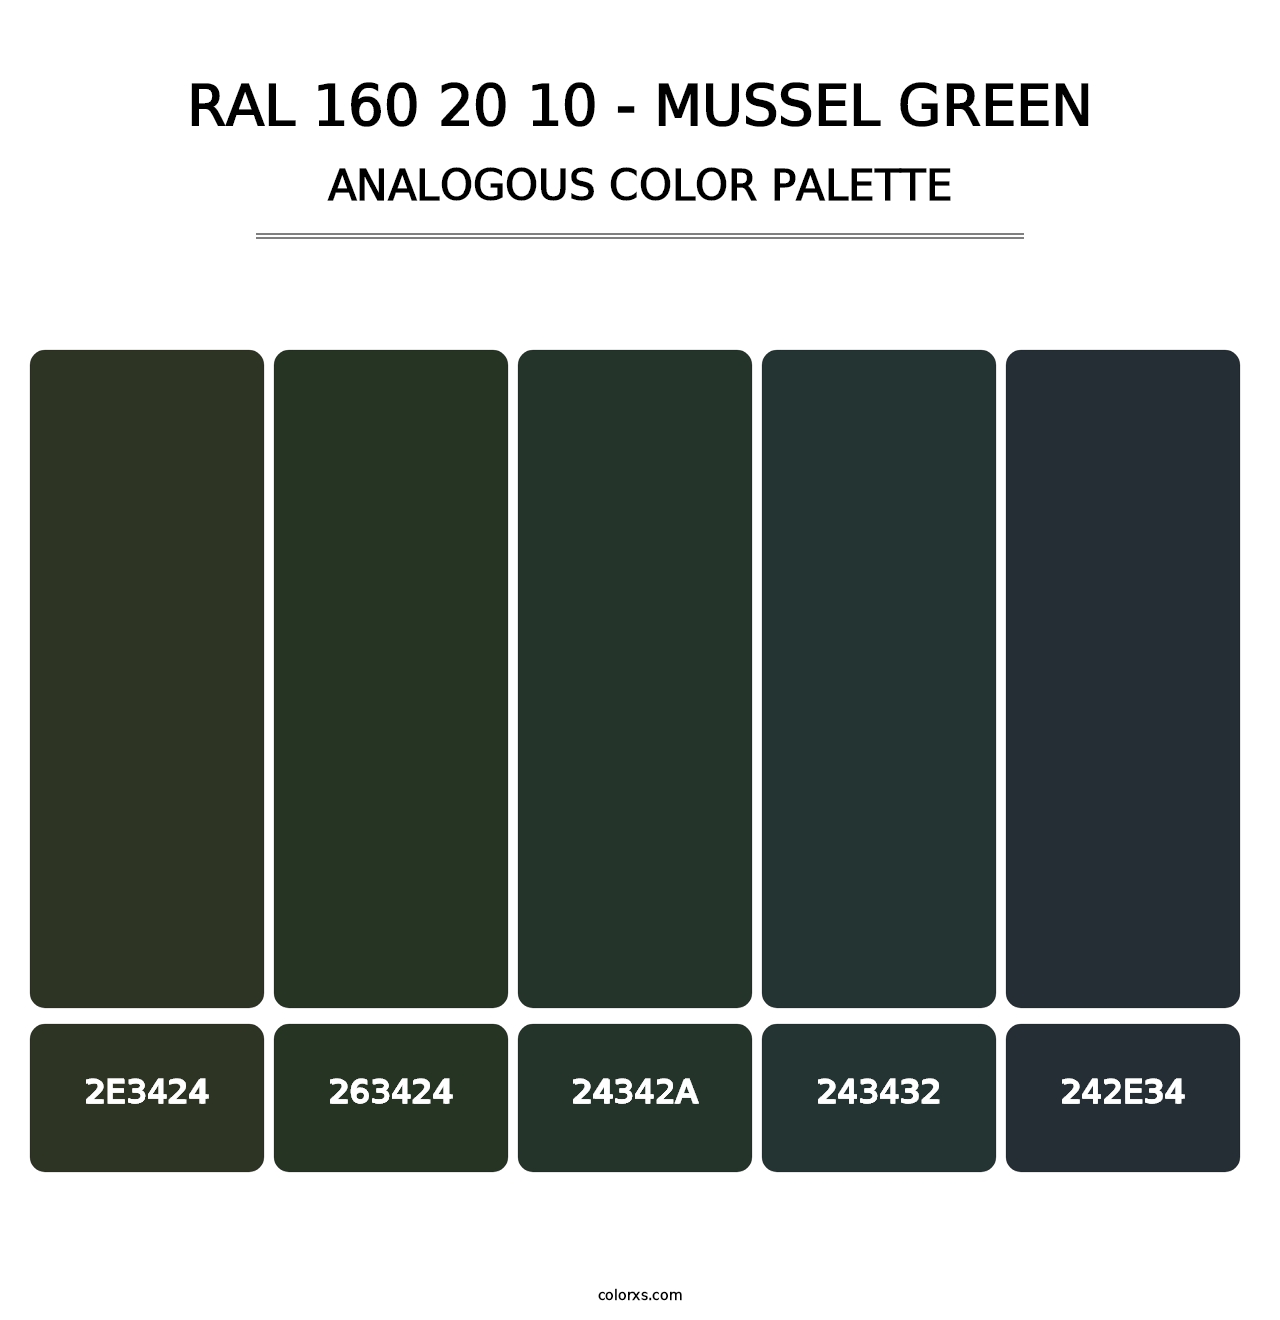 RAL 160 20 10 - Mussel Green - Analogous Color Palette